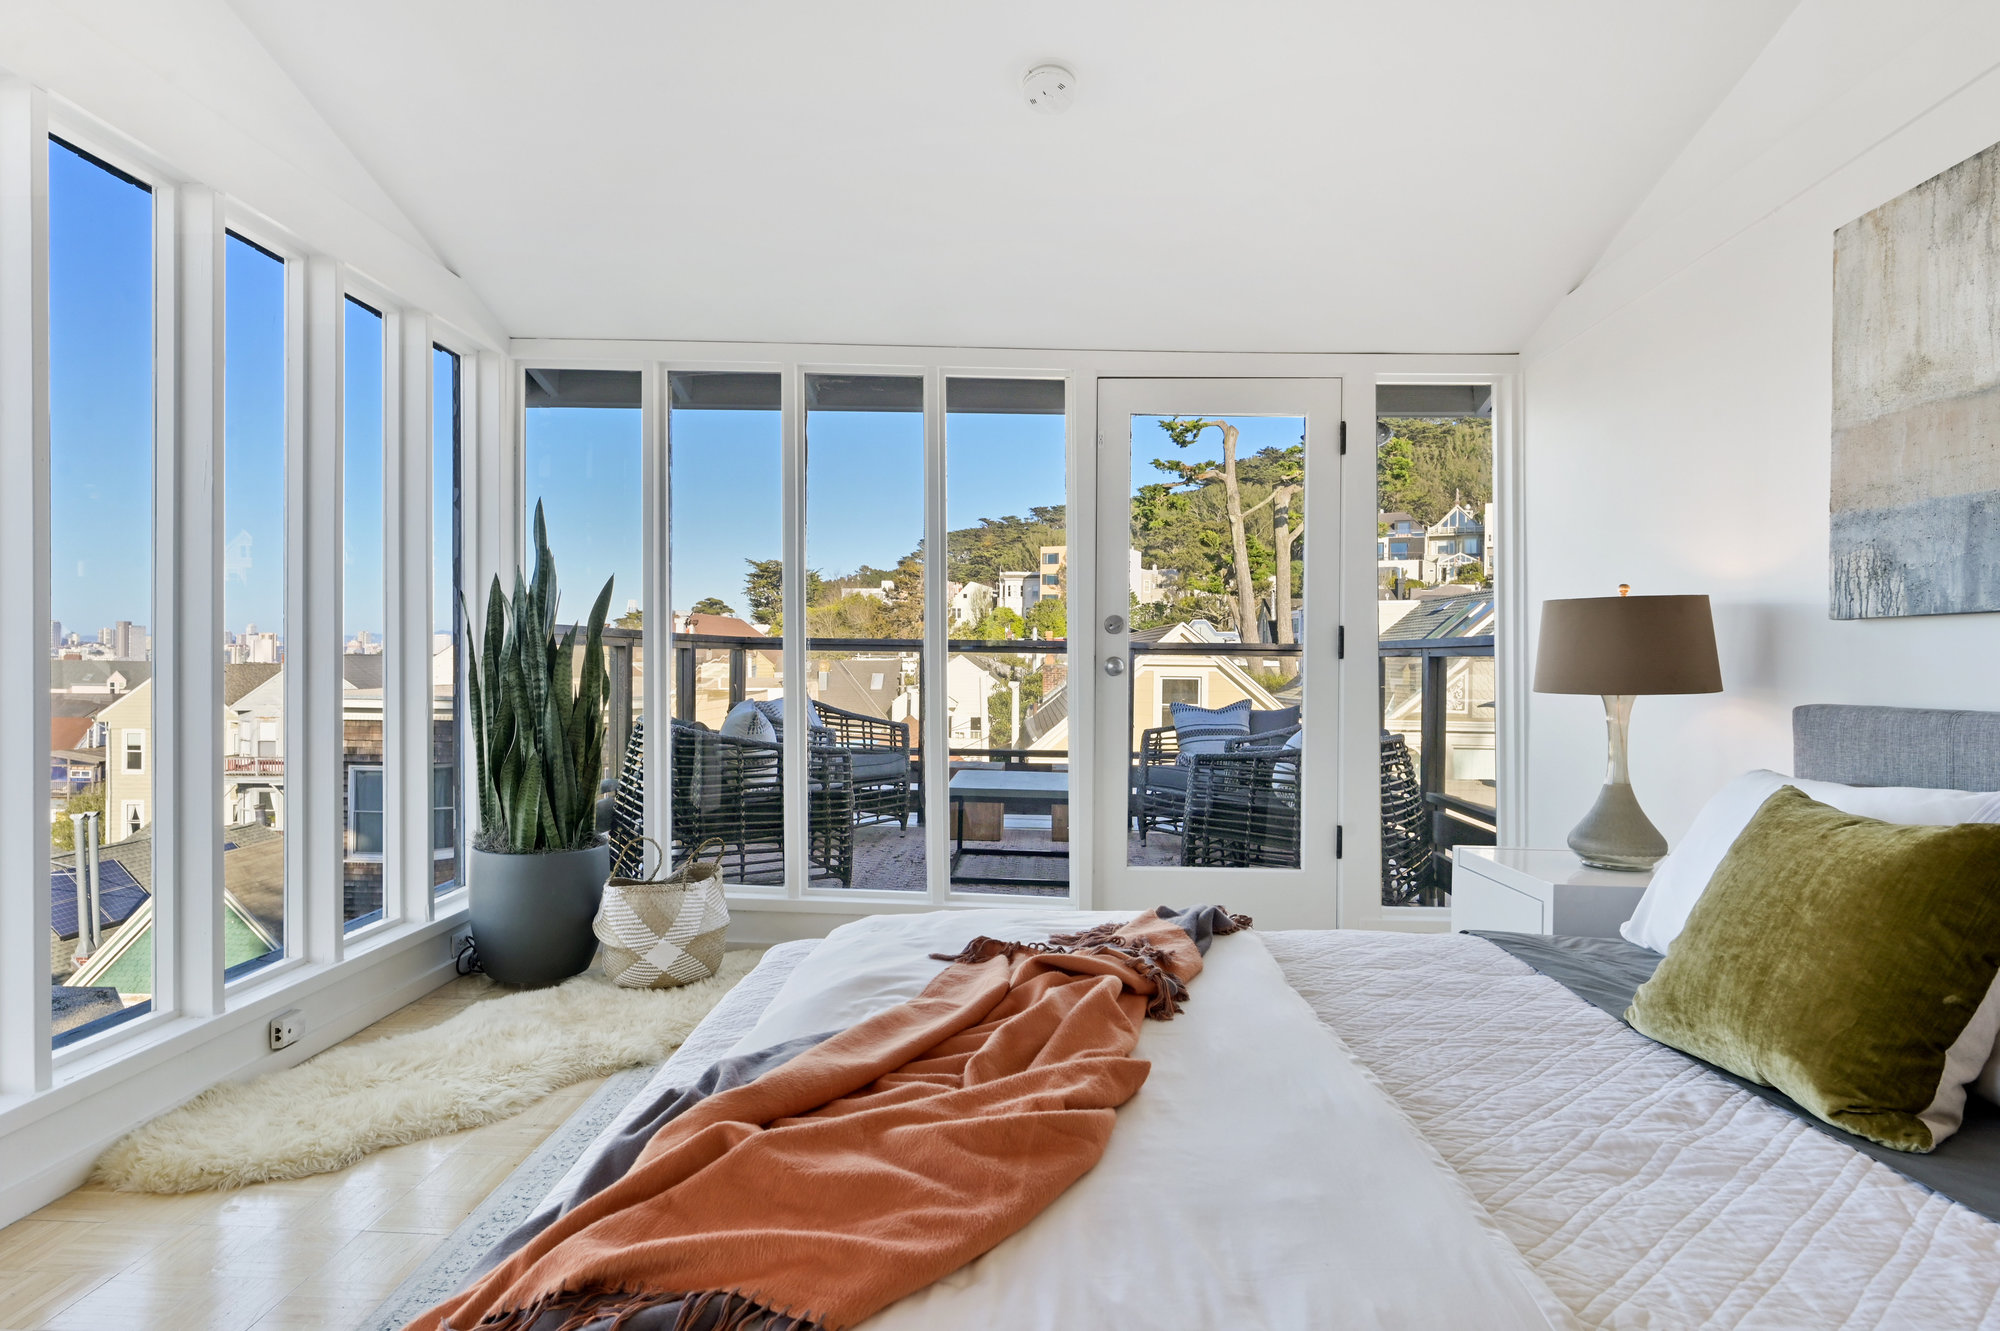 Property Photo: Panoramic windows surrounding the bed, featuring a view of San Francisco